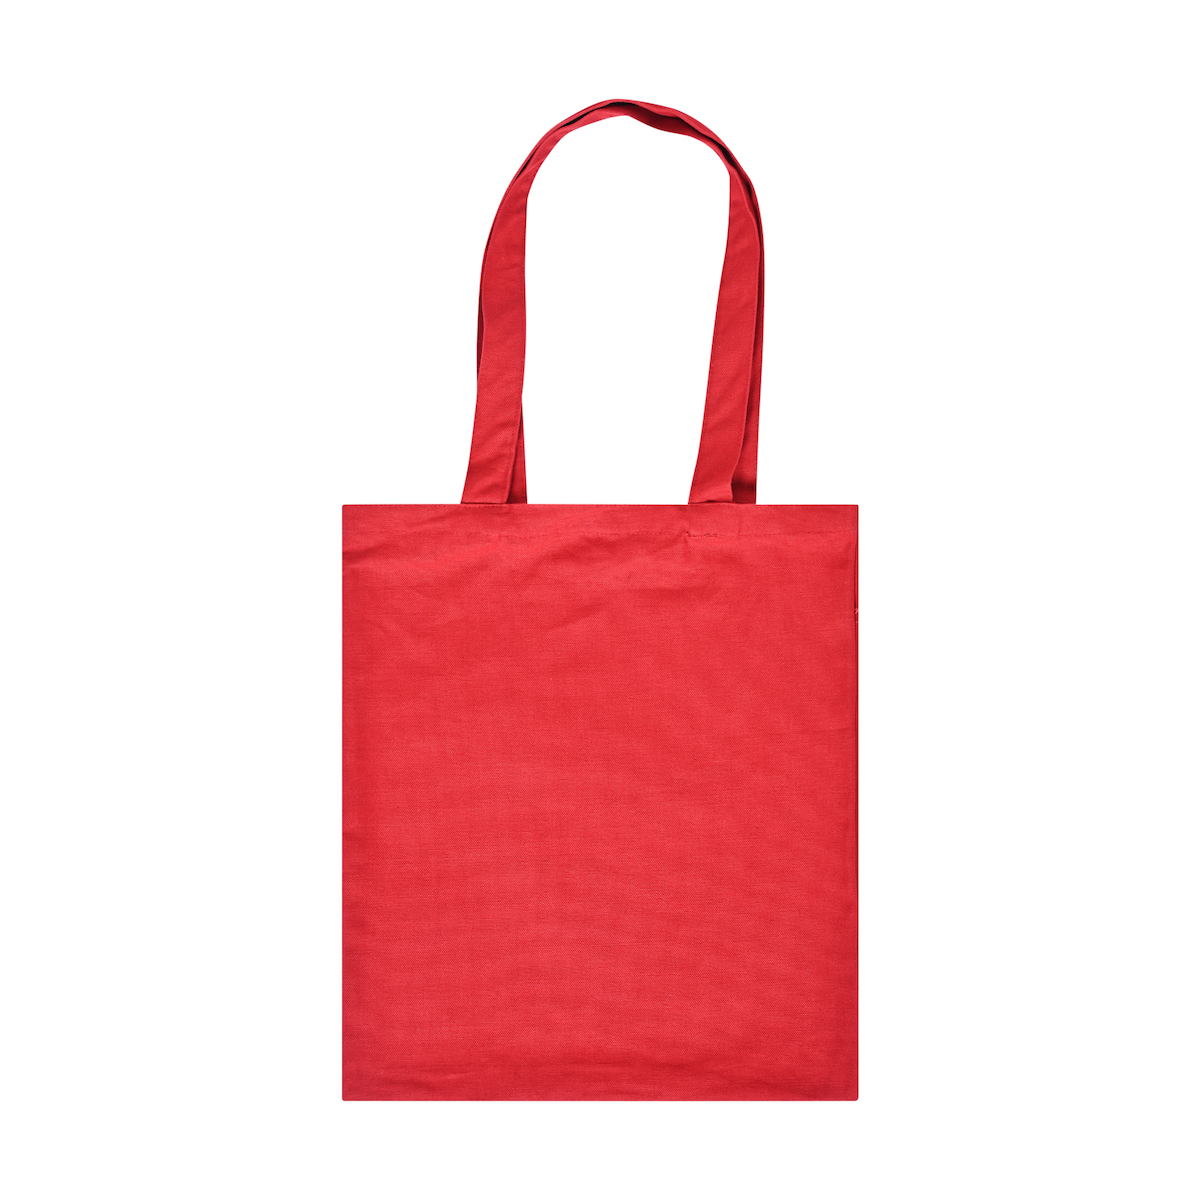 Plain Canvas Bag (5 Count) | Tote Bag with Long Handle 14 x 16